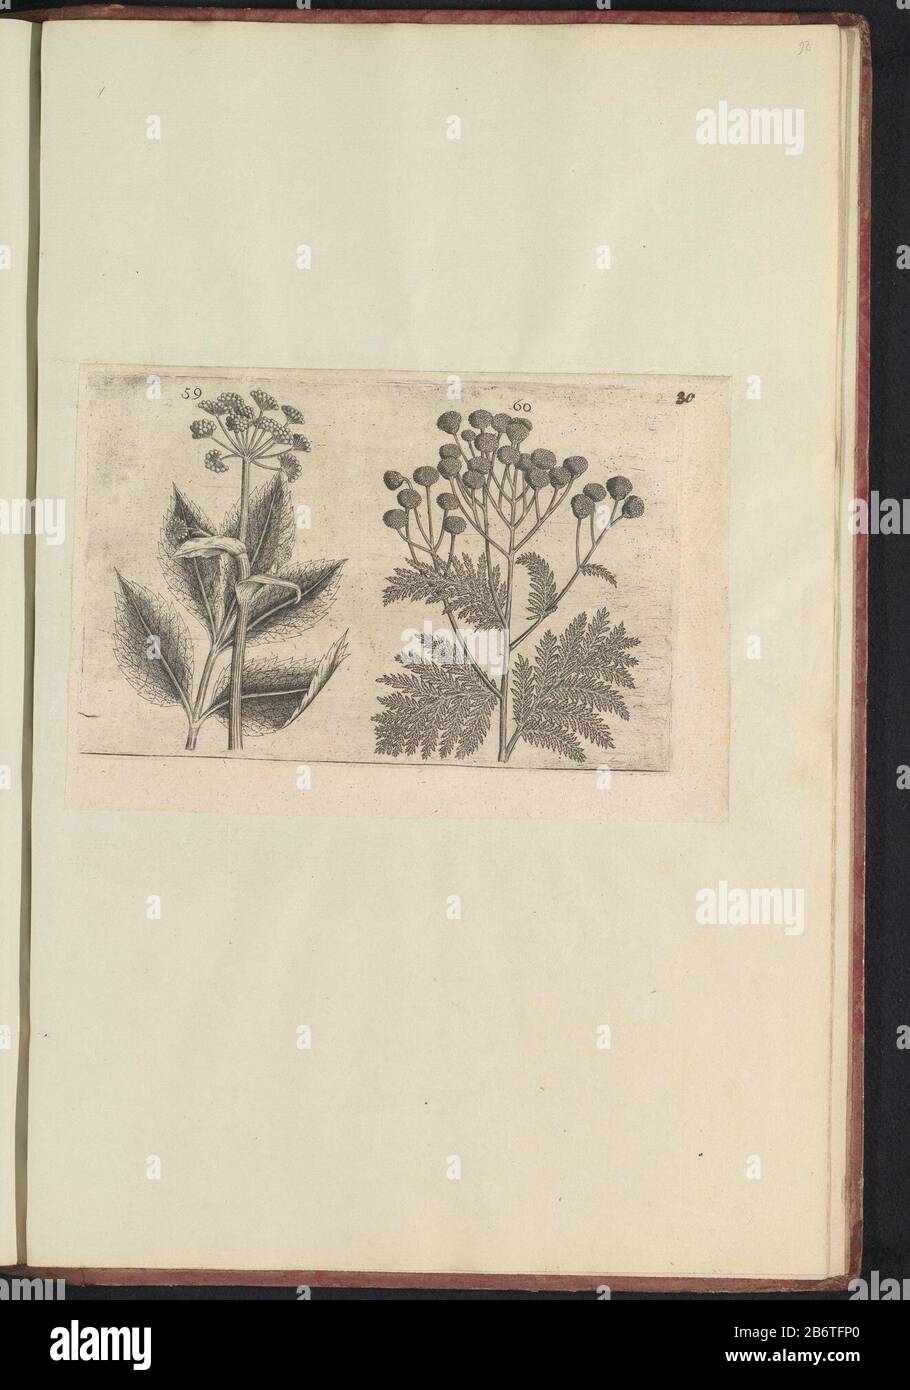 Hertswortel (Seseli libanotis) en boerenwormkruid (Tanacetum vulgare) Hart Carrot and tansy. Figs. 59 and 60 numbered in a leaf with the hand 30. In: Anselmi Boëtii the Boot I.C. Brugensis & Rodolphi II. Imp. Novel. a medical cubiculis Florum, Herbarum, ac fructuum selectiorum icones, and vires pleraeque hactenus ignotæ. Part of the album with sheets and plates from the Boodts herbarium of 1640. The twelfth twelve albums of watercolors of animals, birds and plants are known around 1600, commissioned by Emperor Rudolf II. Manufacturer : printmaker: anonymous to print from: Crispin on de Passe ( Stock Photo